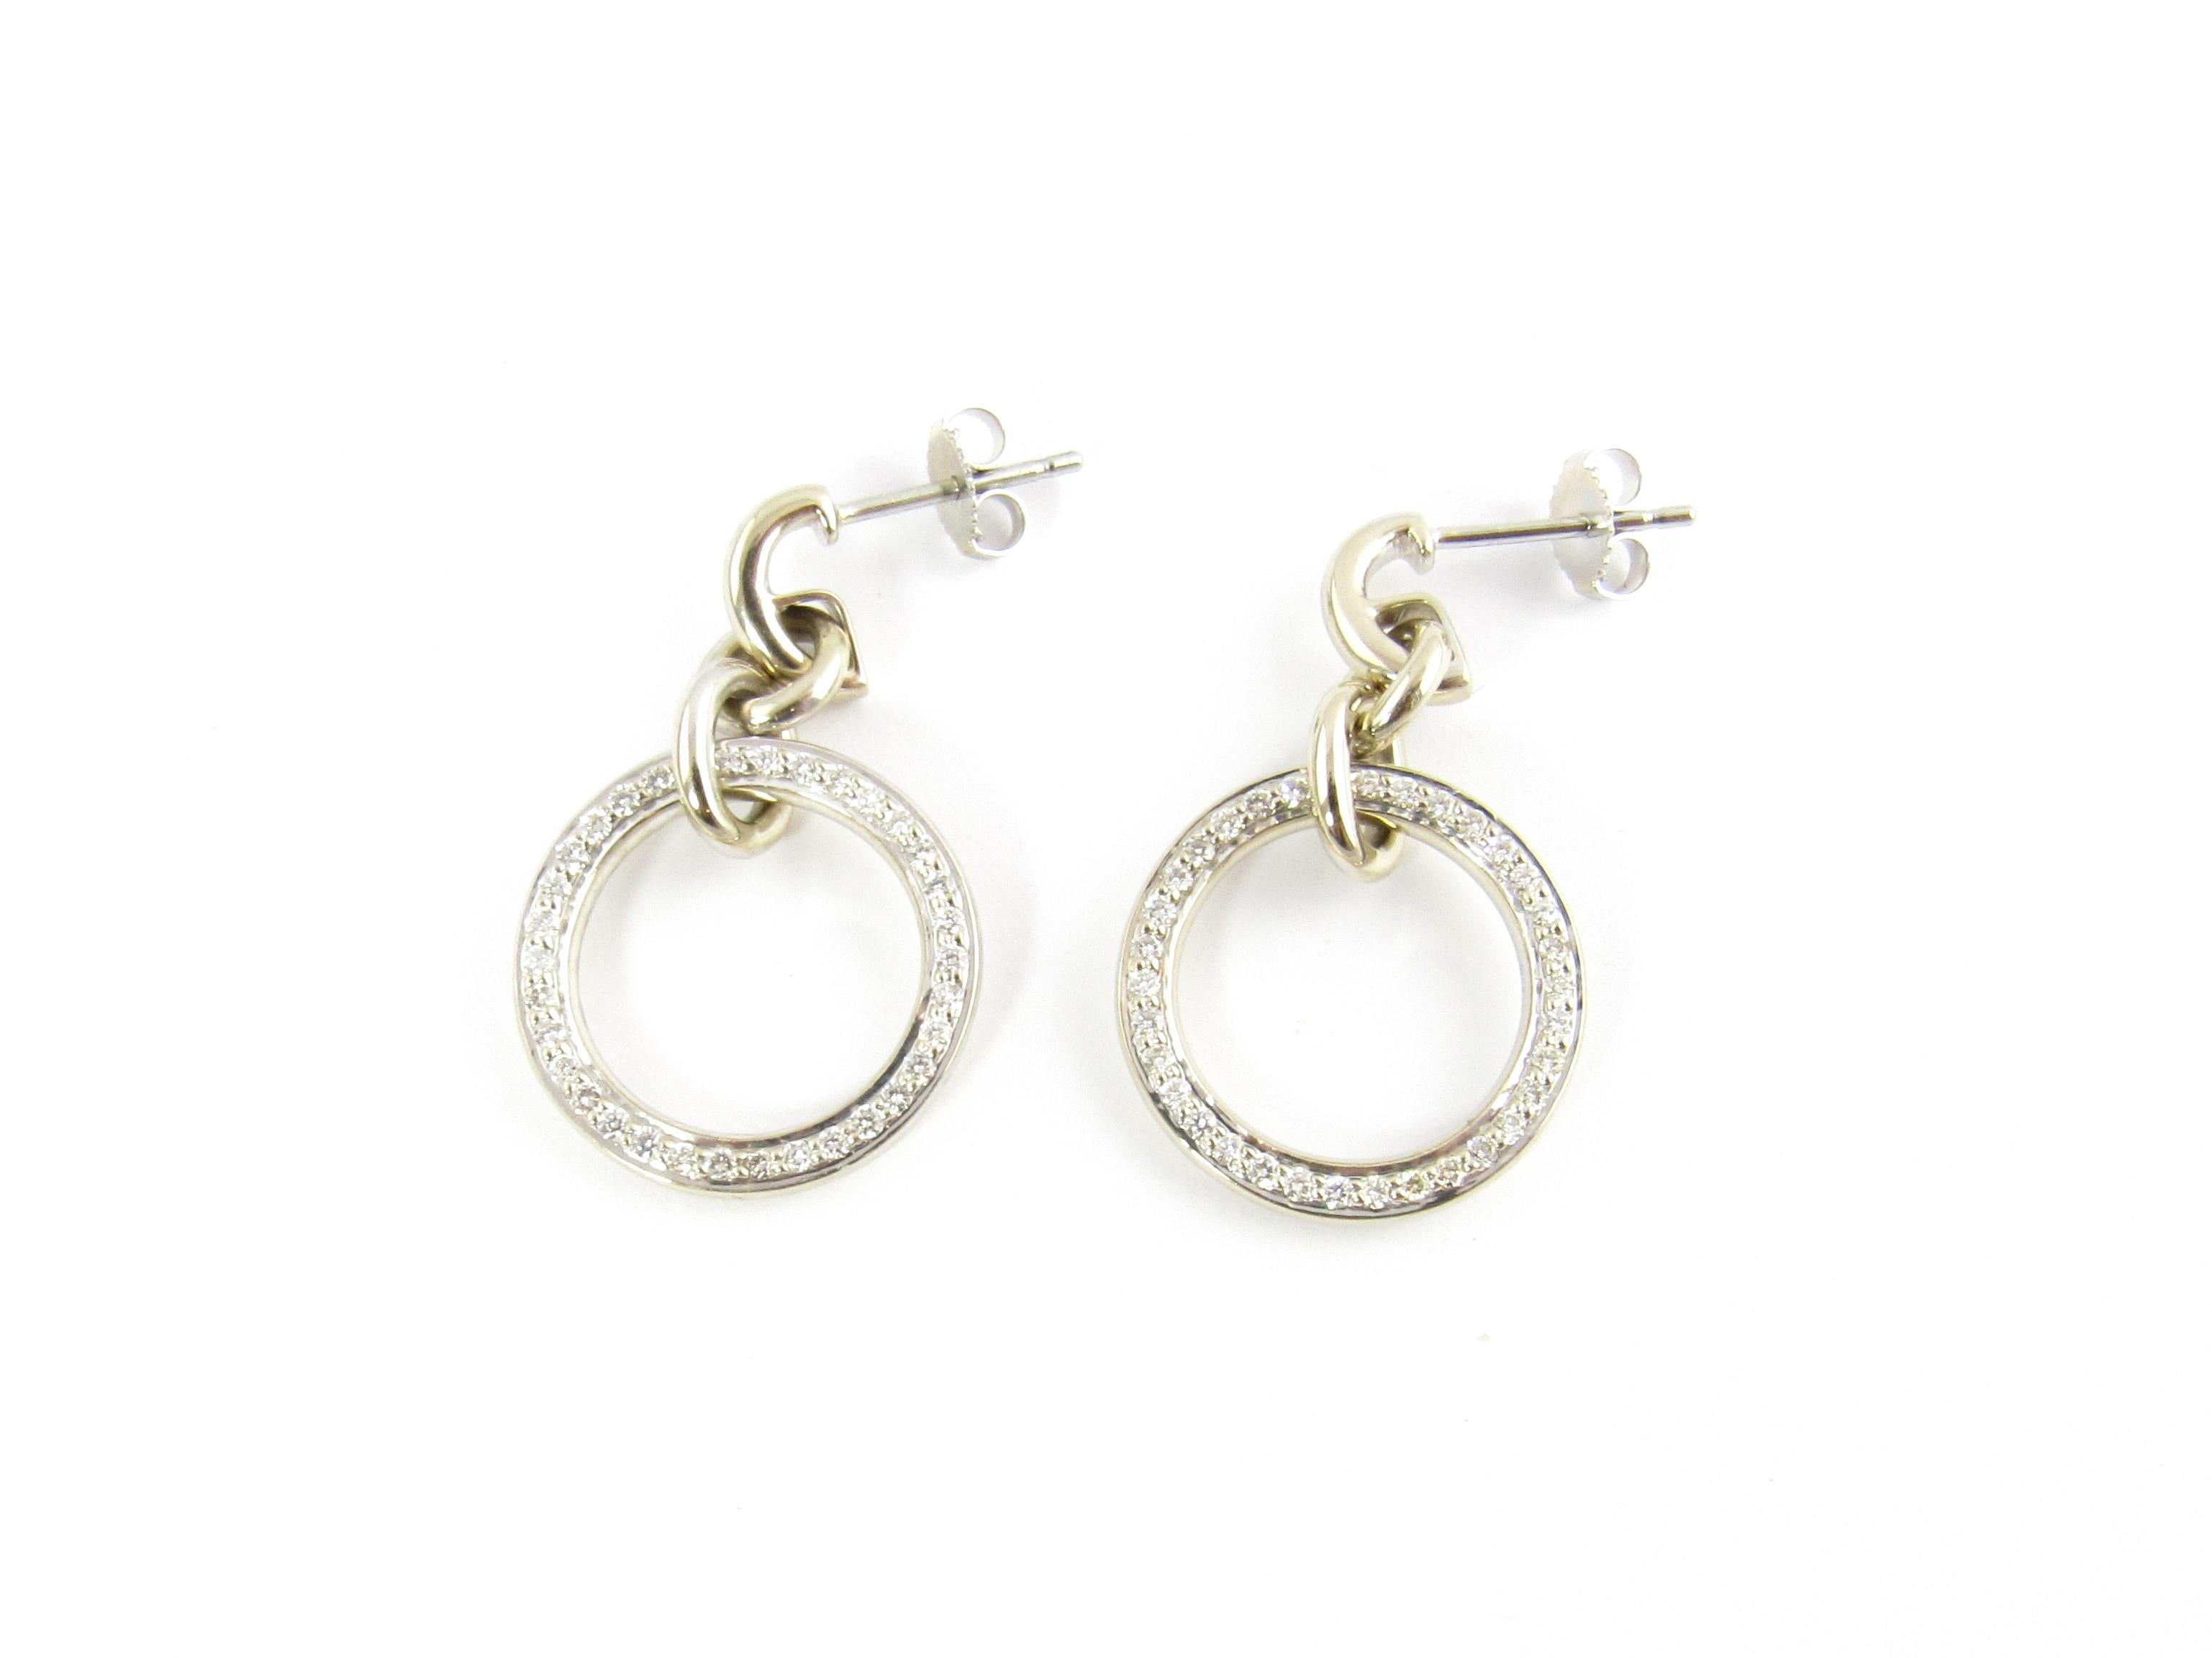 Vintage 18 Karat White Gold and Diamond Earrings

These stunning dangling hoop earrings each feature 34 round brilliant cut diamond set in beautifully detailed 18K white gold. Push back closures. (Earring backs are 14K).

Approximate total diamond